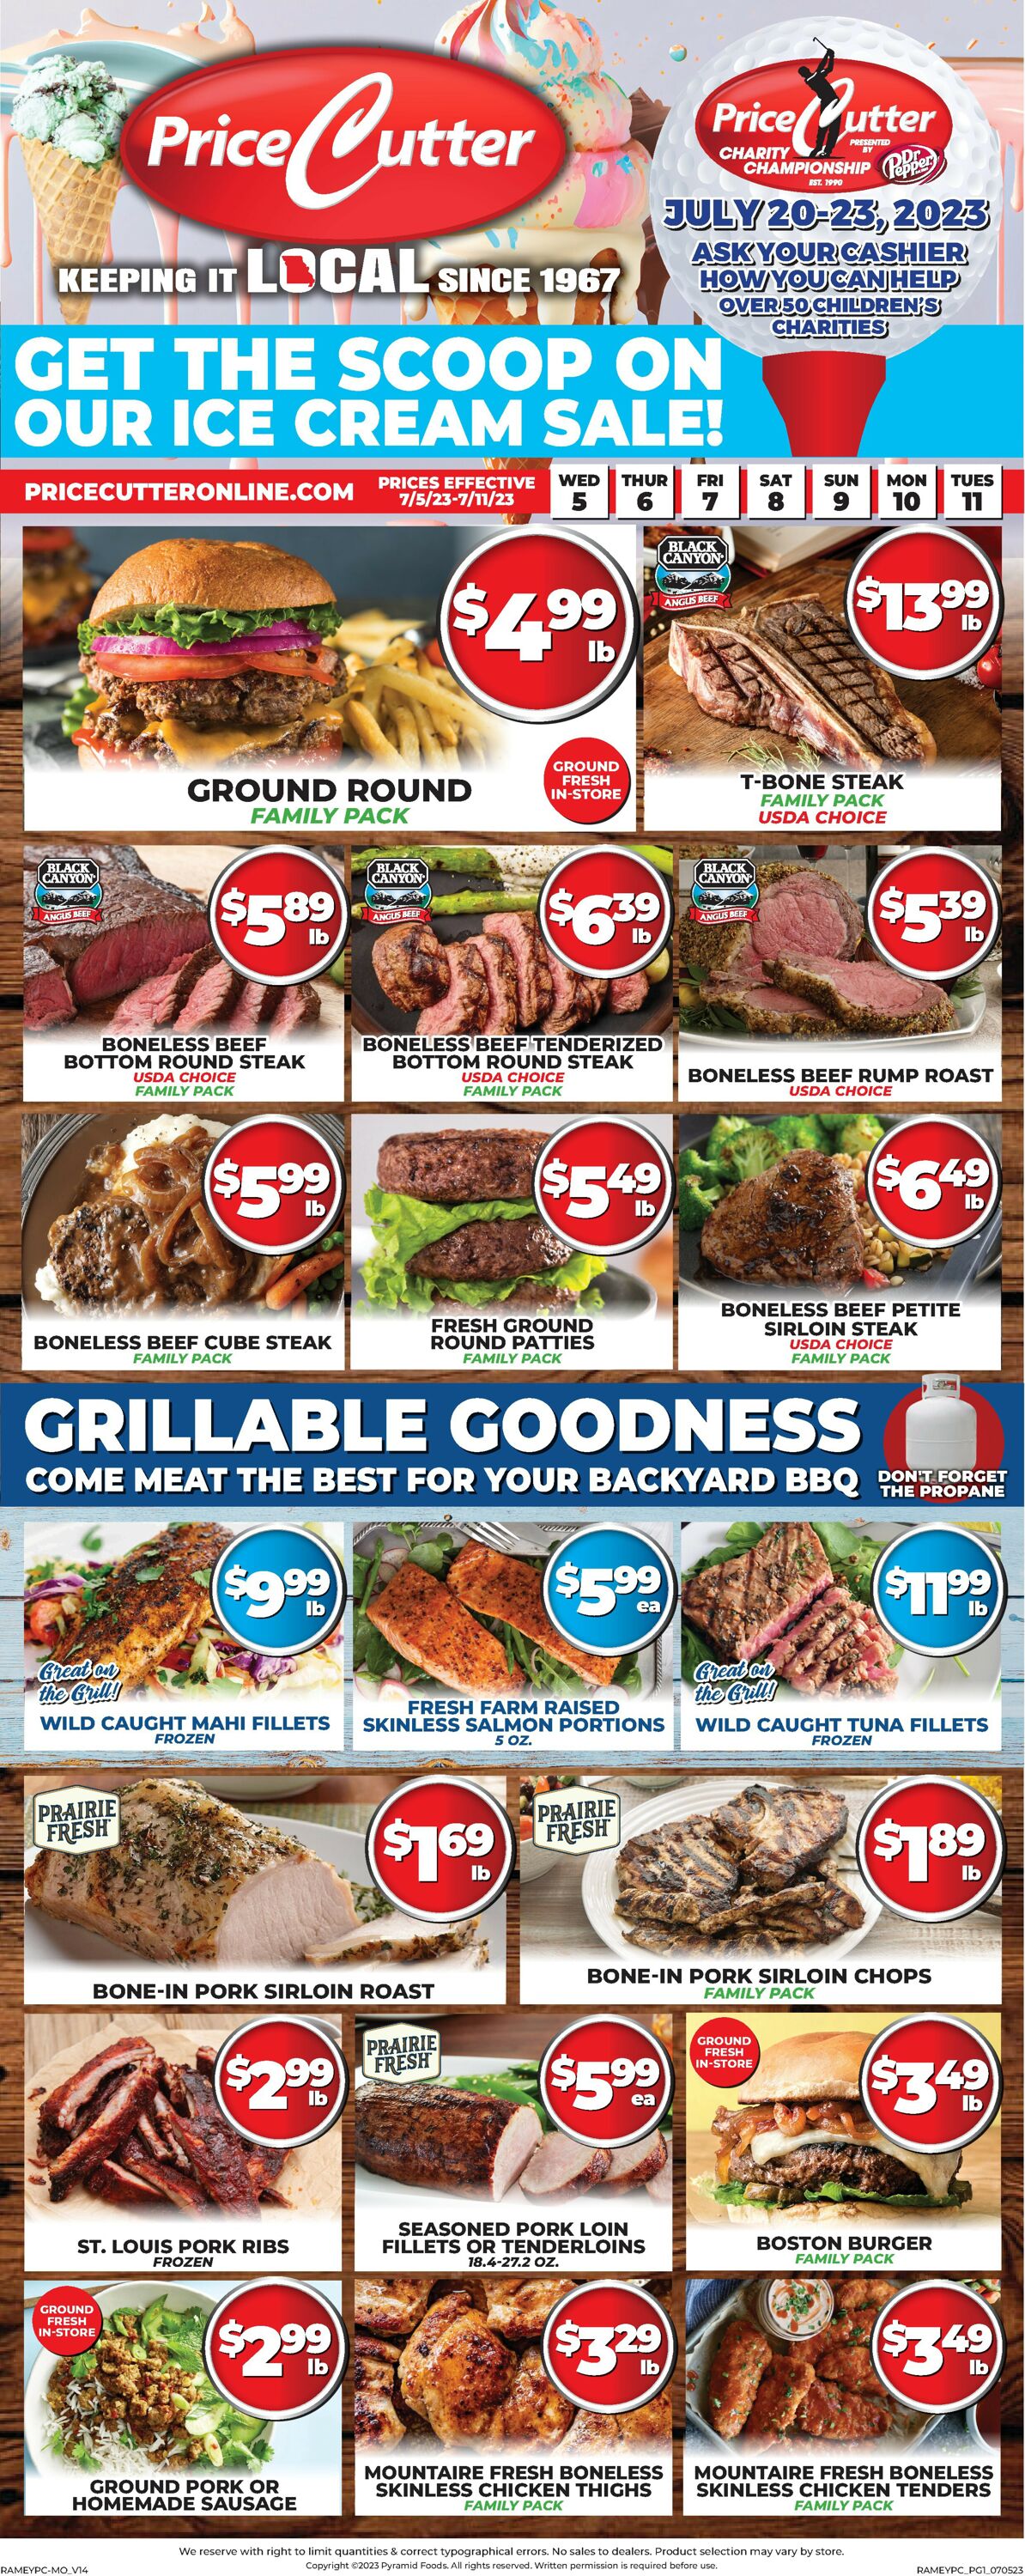 Price Cutter Weekly Ad Circular - valid 07/05-07/11/2023